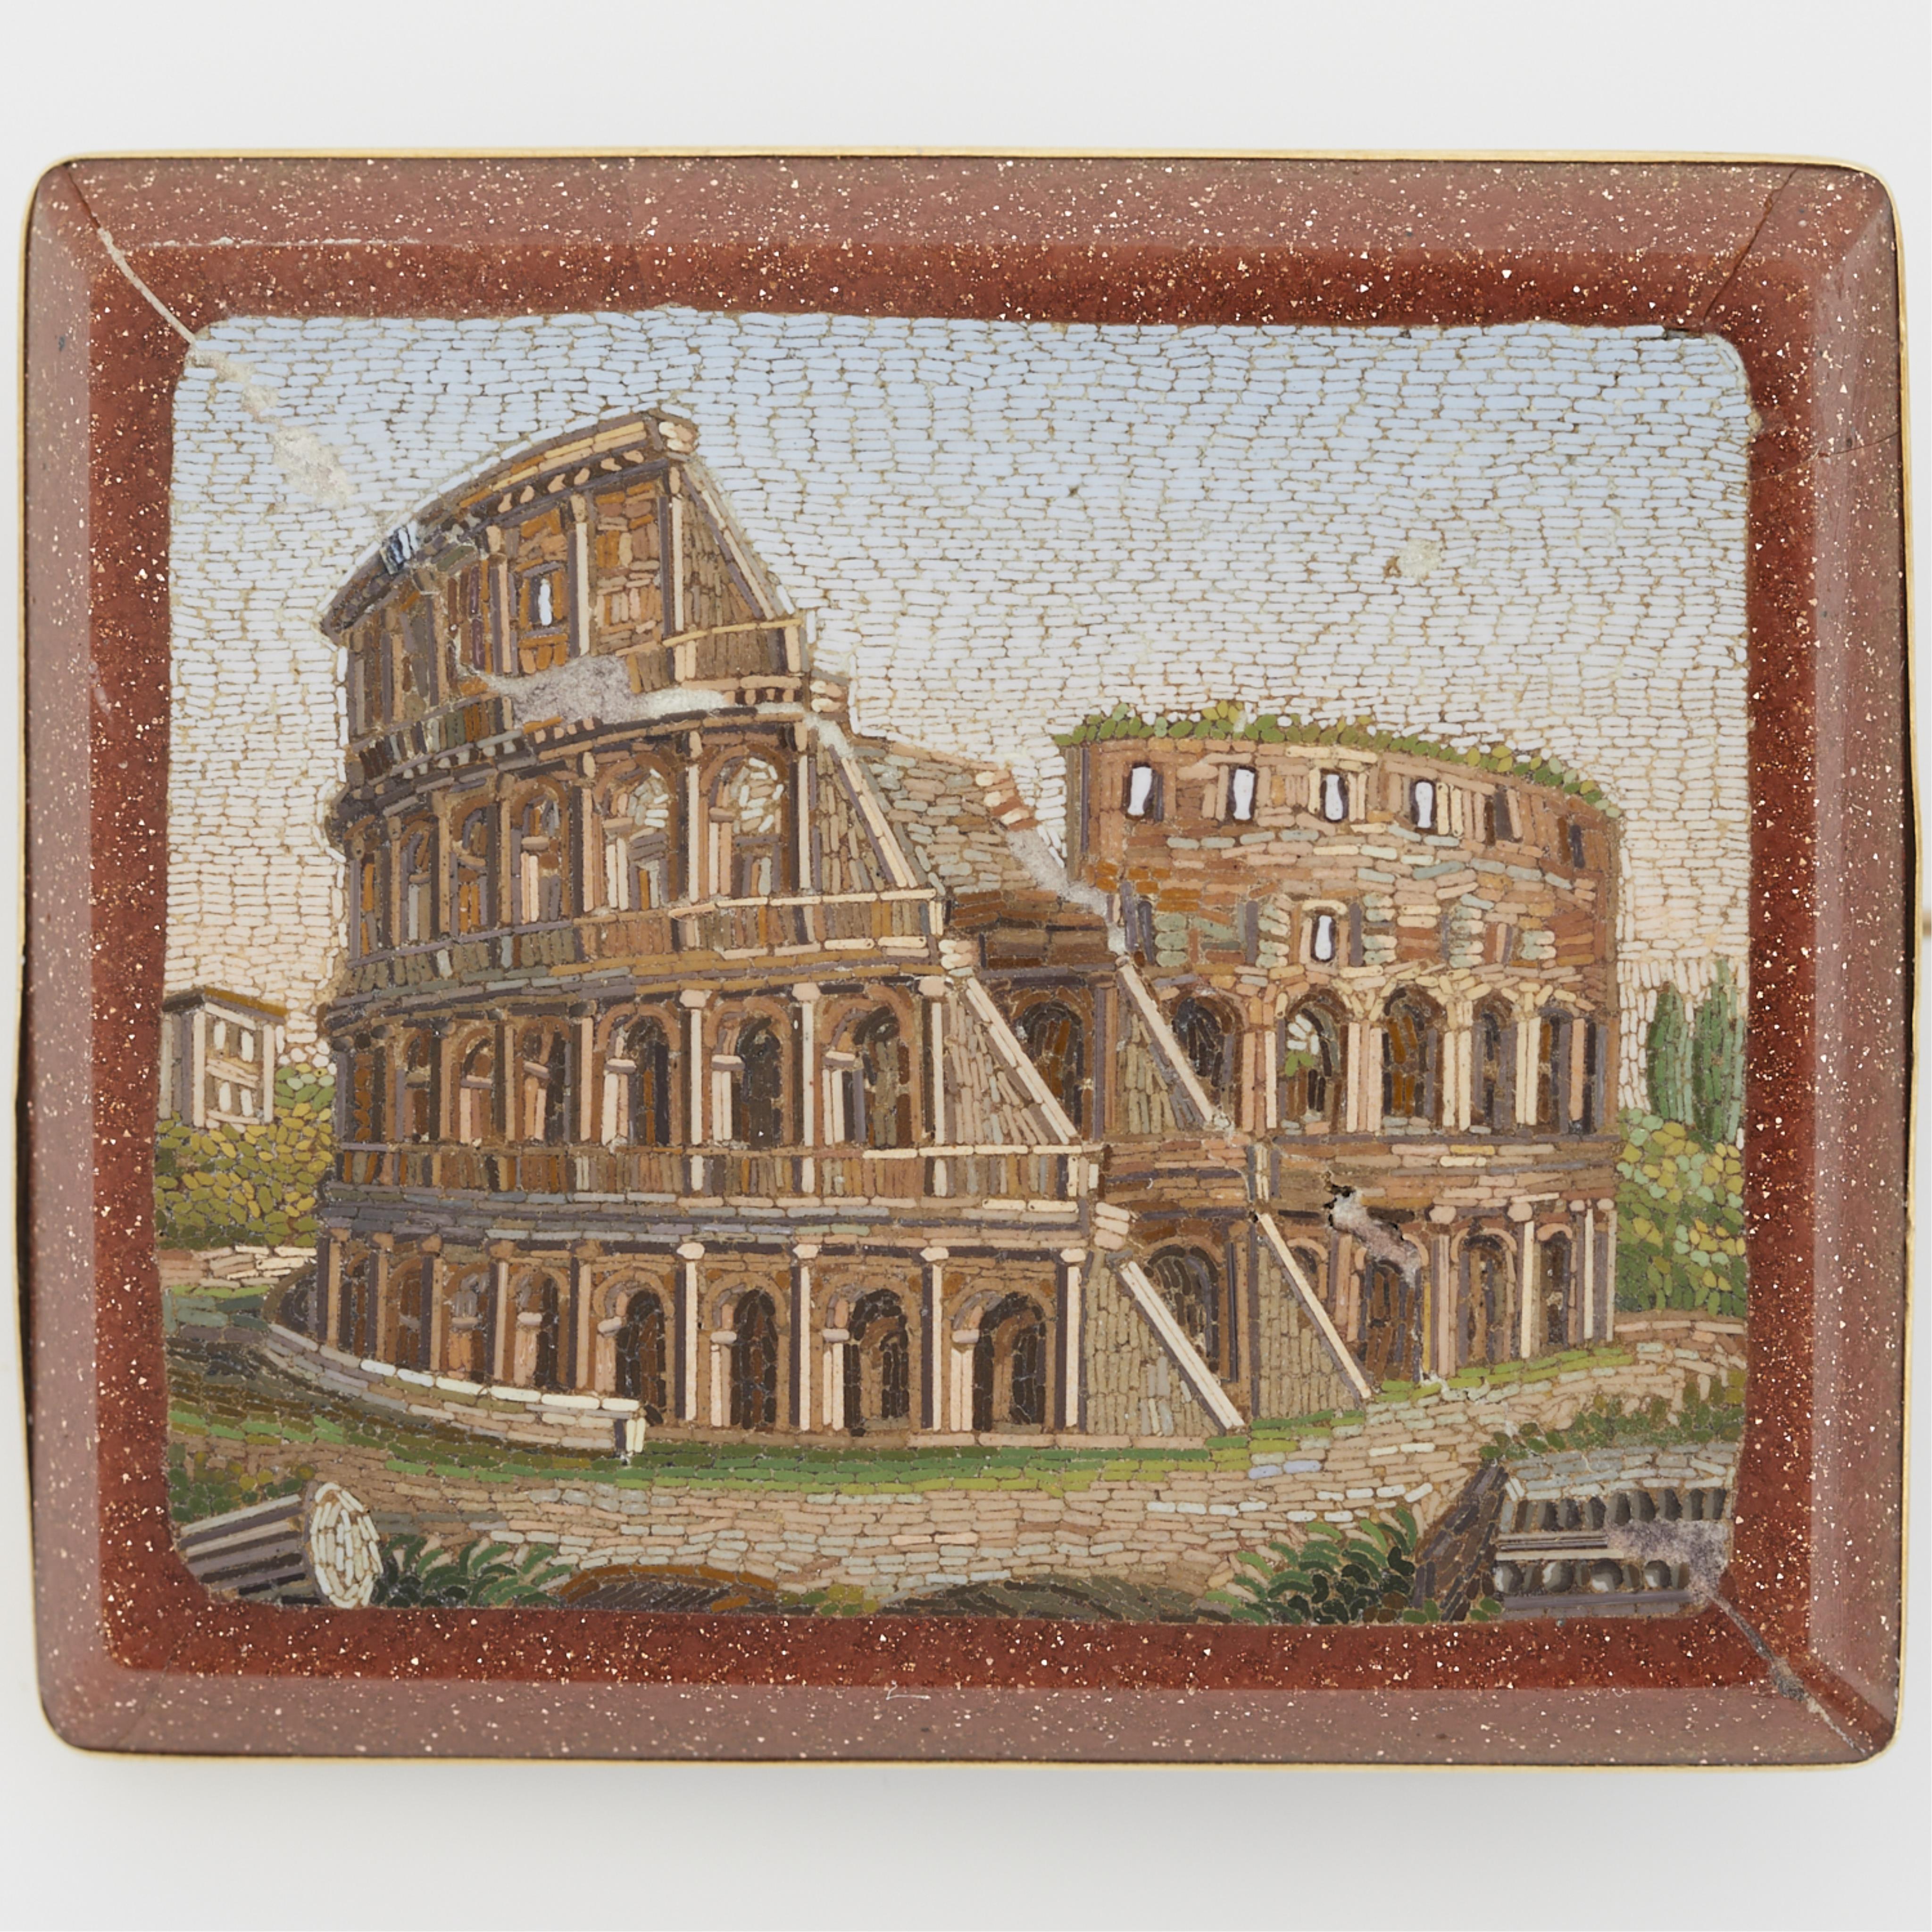 14k Grand Tour Micromosaic Brooch of the Colosseum - Image 3 of 7